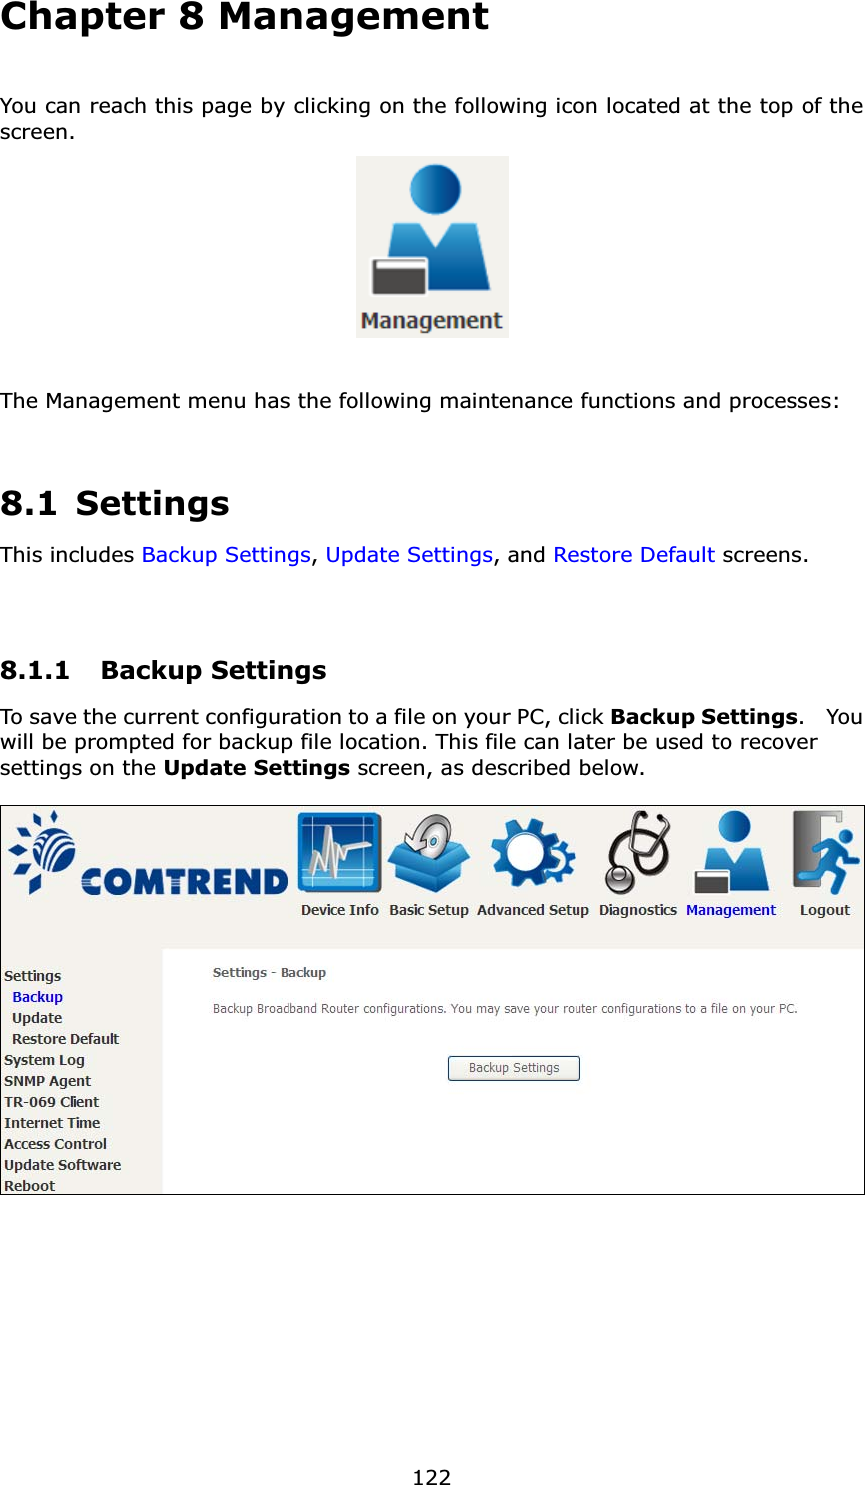 122Chapter 8 ManagementYou can reach this page by clicking on the following icon located at the top of the screen.The Management menu has the following maintenance functions and processes:8.1 SettingsThis includes Backup Settings, Update Settings,and Restore Default screens.8.1.1 Backup SettingsTo save the current configuration to a file on your PC, click Backup Settings.You will be prompted for backup file location. This file can later be used to recover settings on the Update Settings screen, as described below.